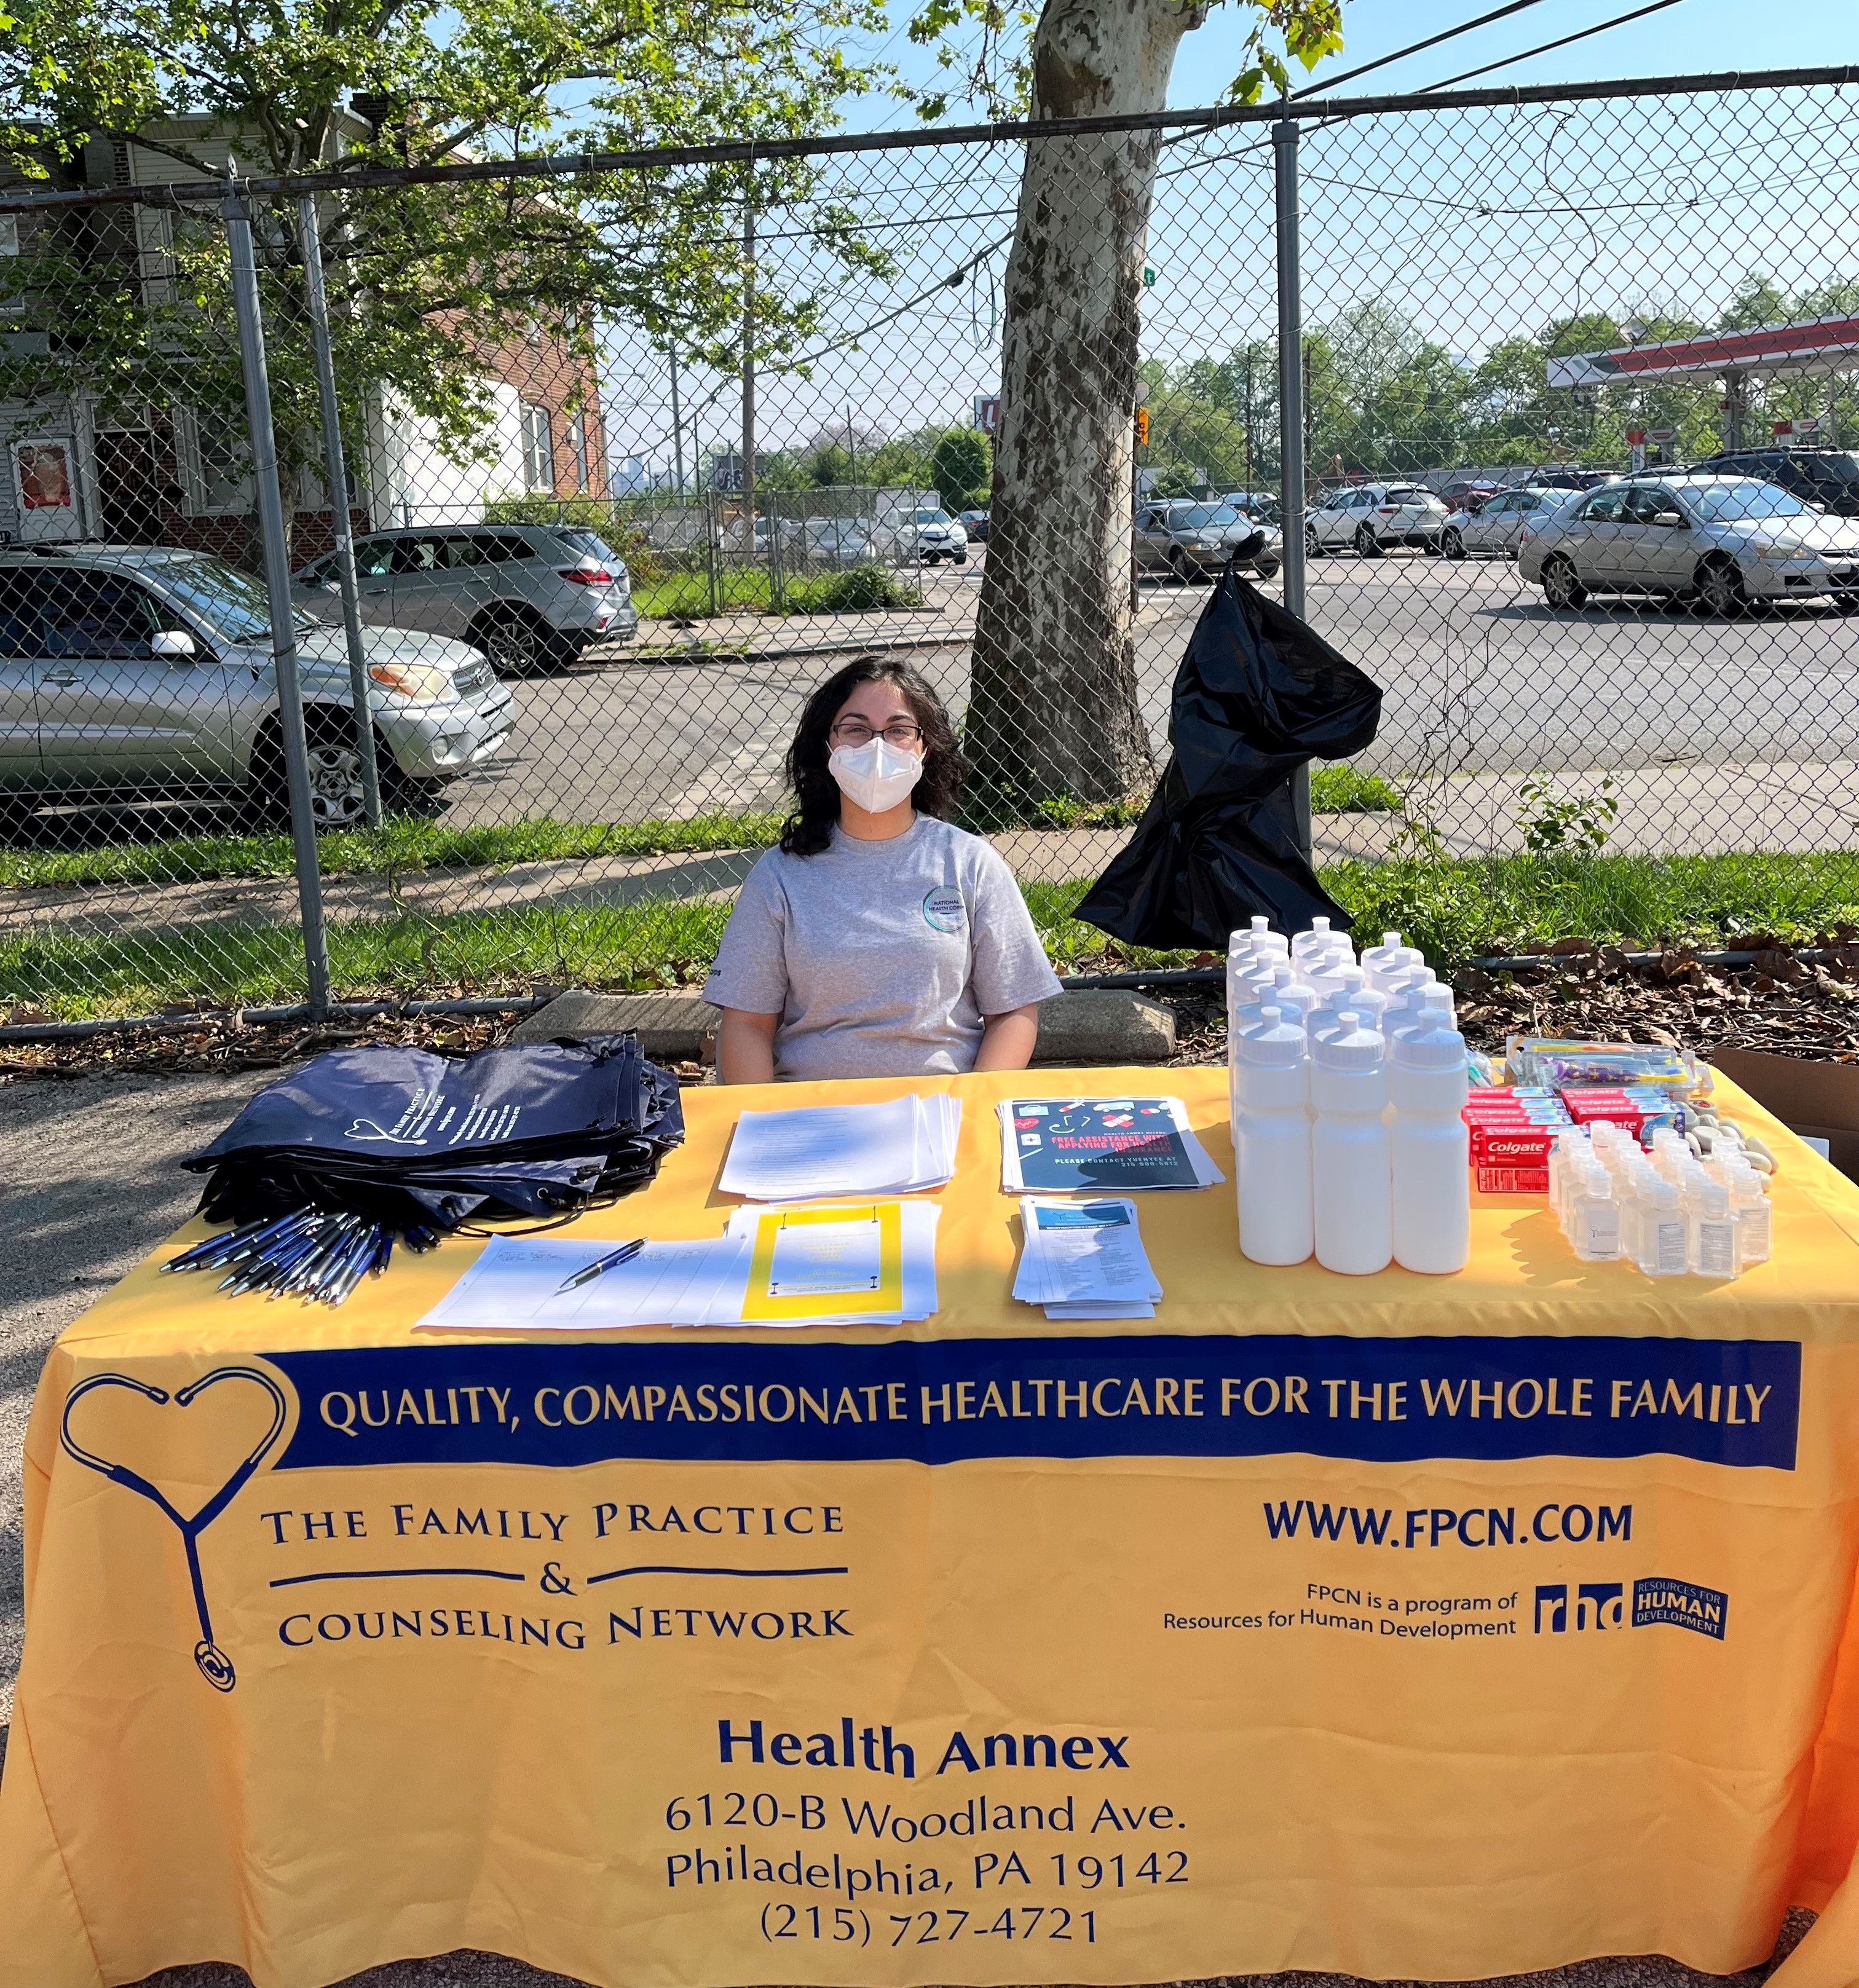 Amal sitting at a table covered in a yellow cloth advertising the Health Annex. On the table are bags, water bottles, and other giveaways for community members.